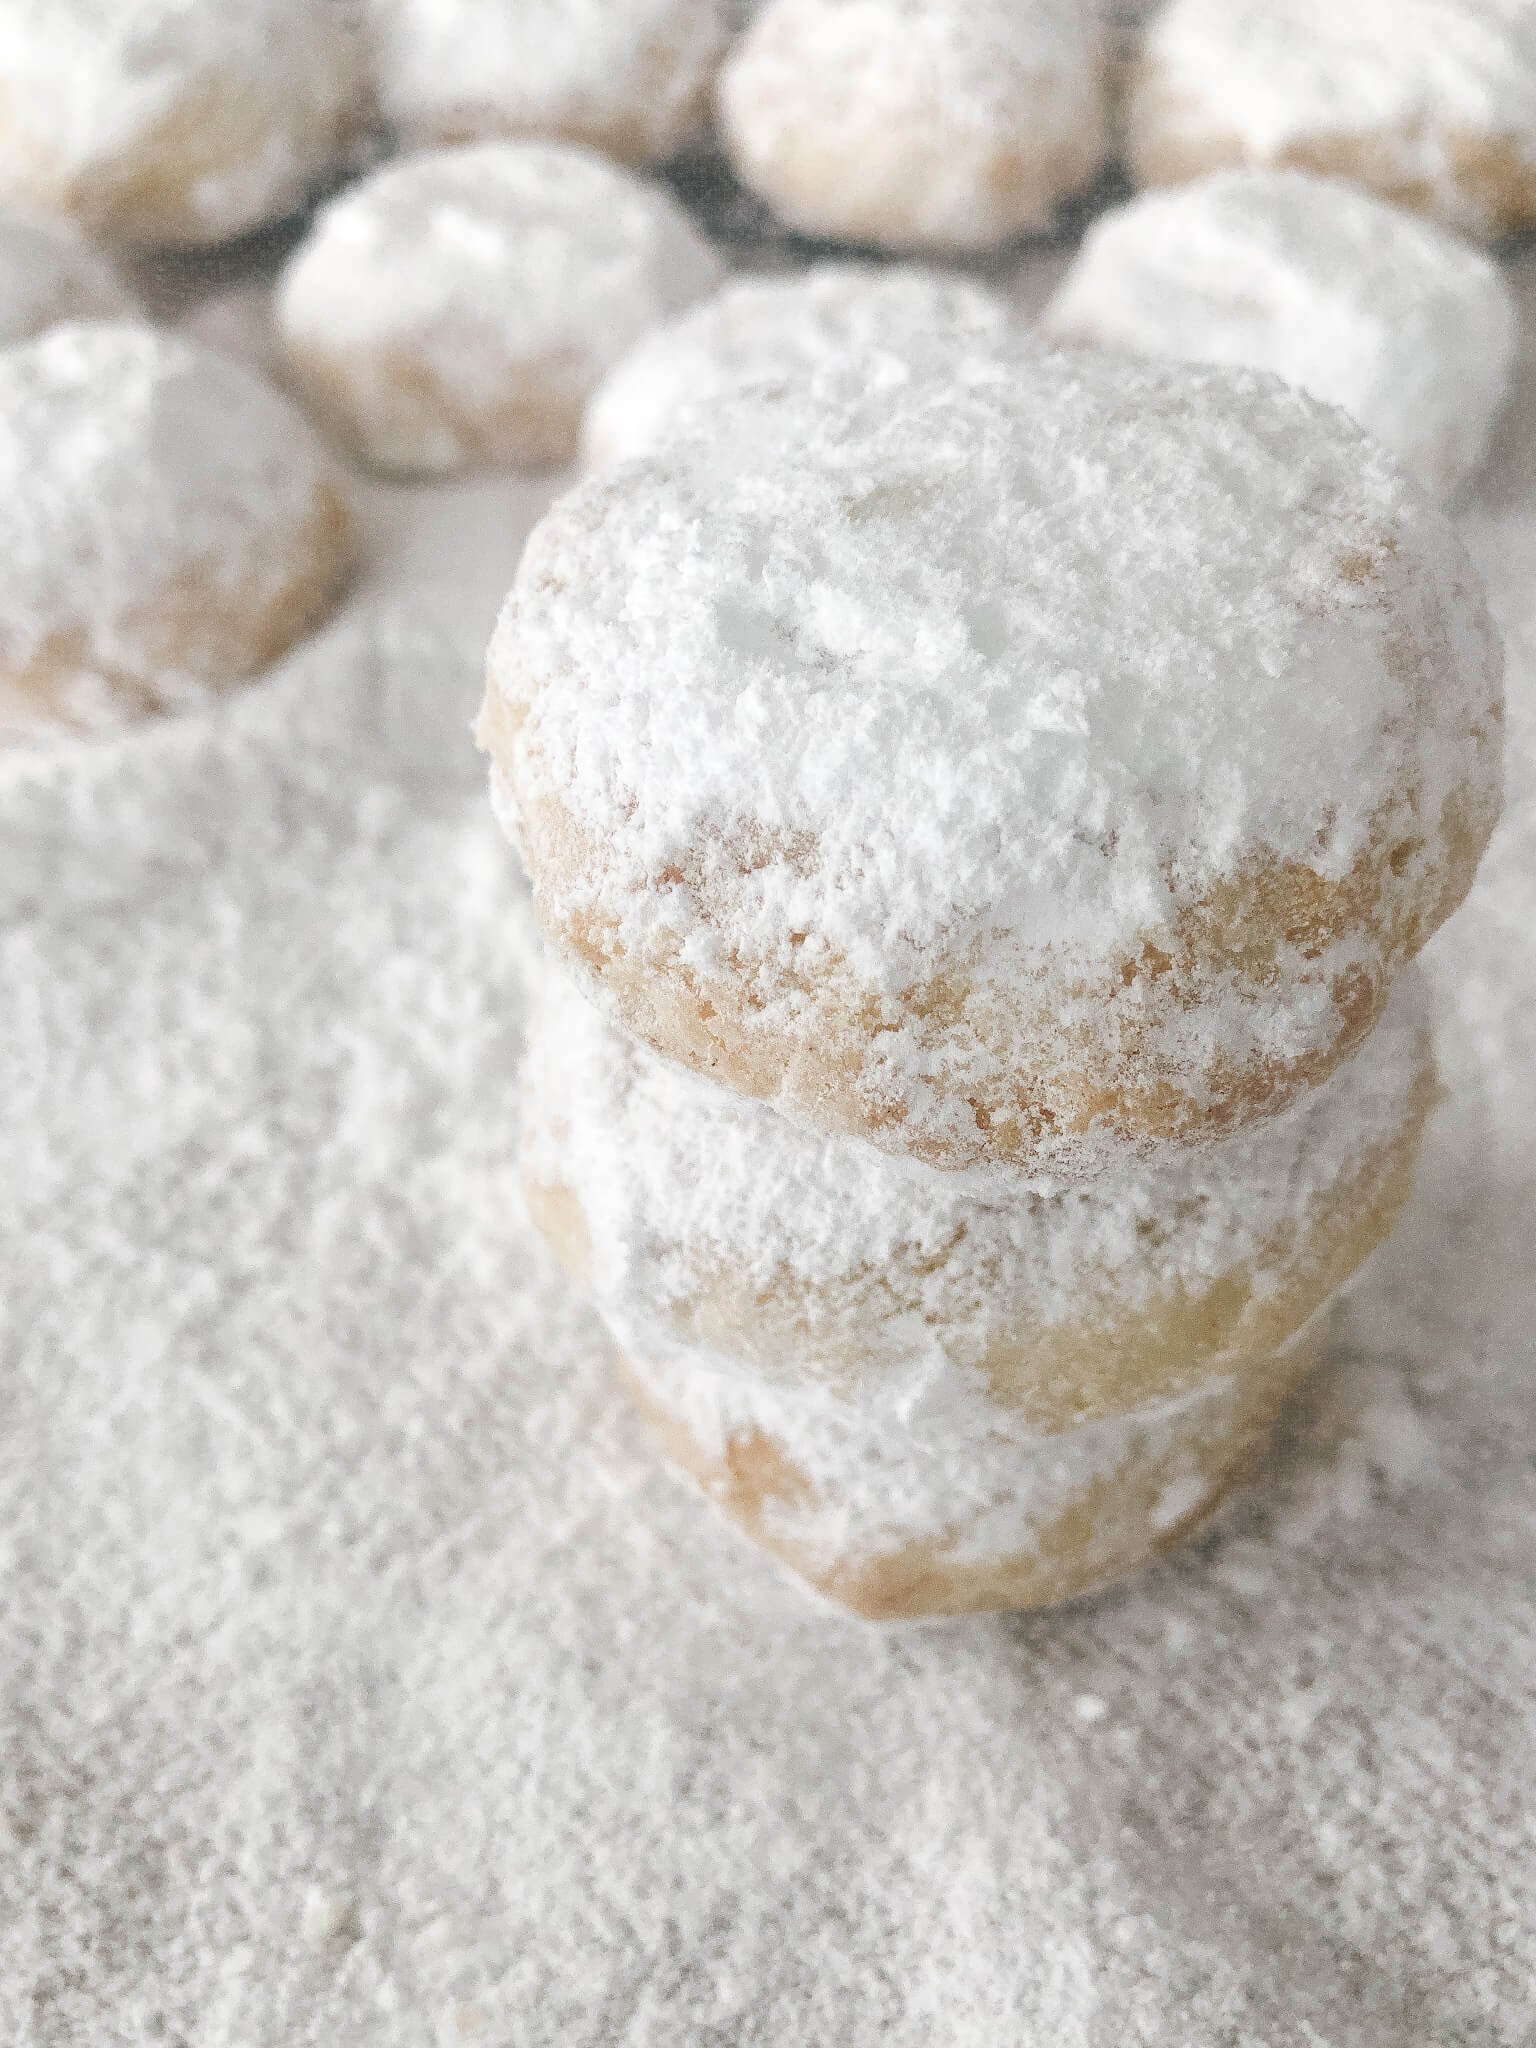 Round Greek almond cookies stacked on top of each other and sprinkled with icing sugar